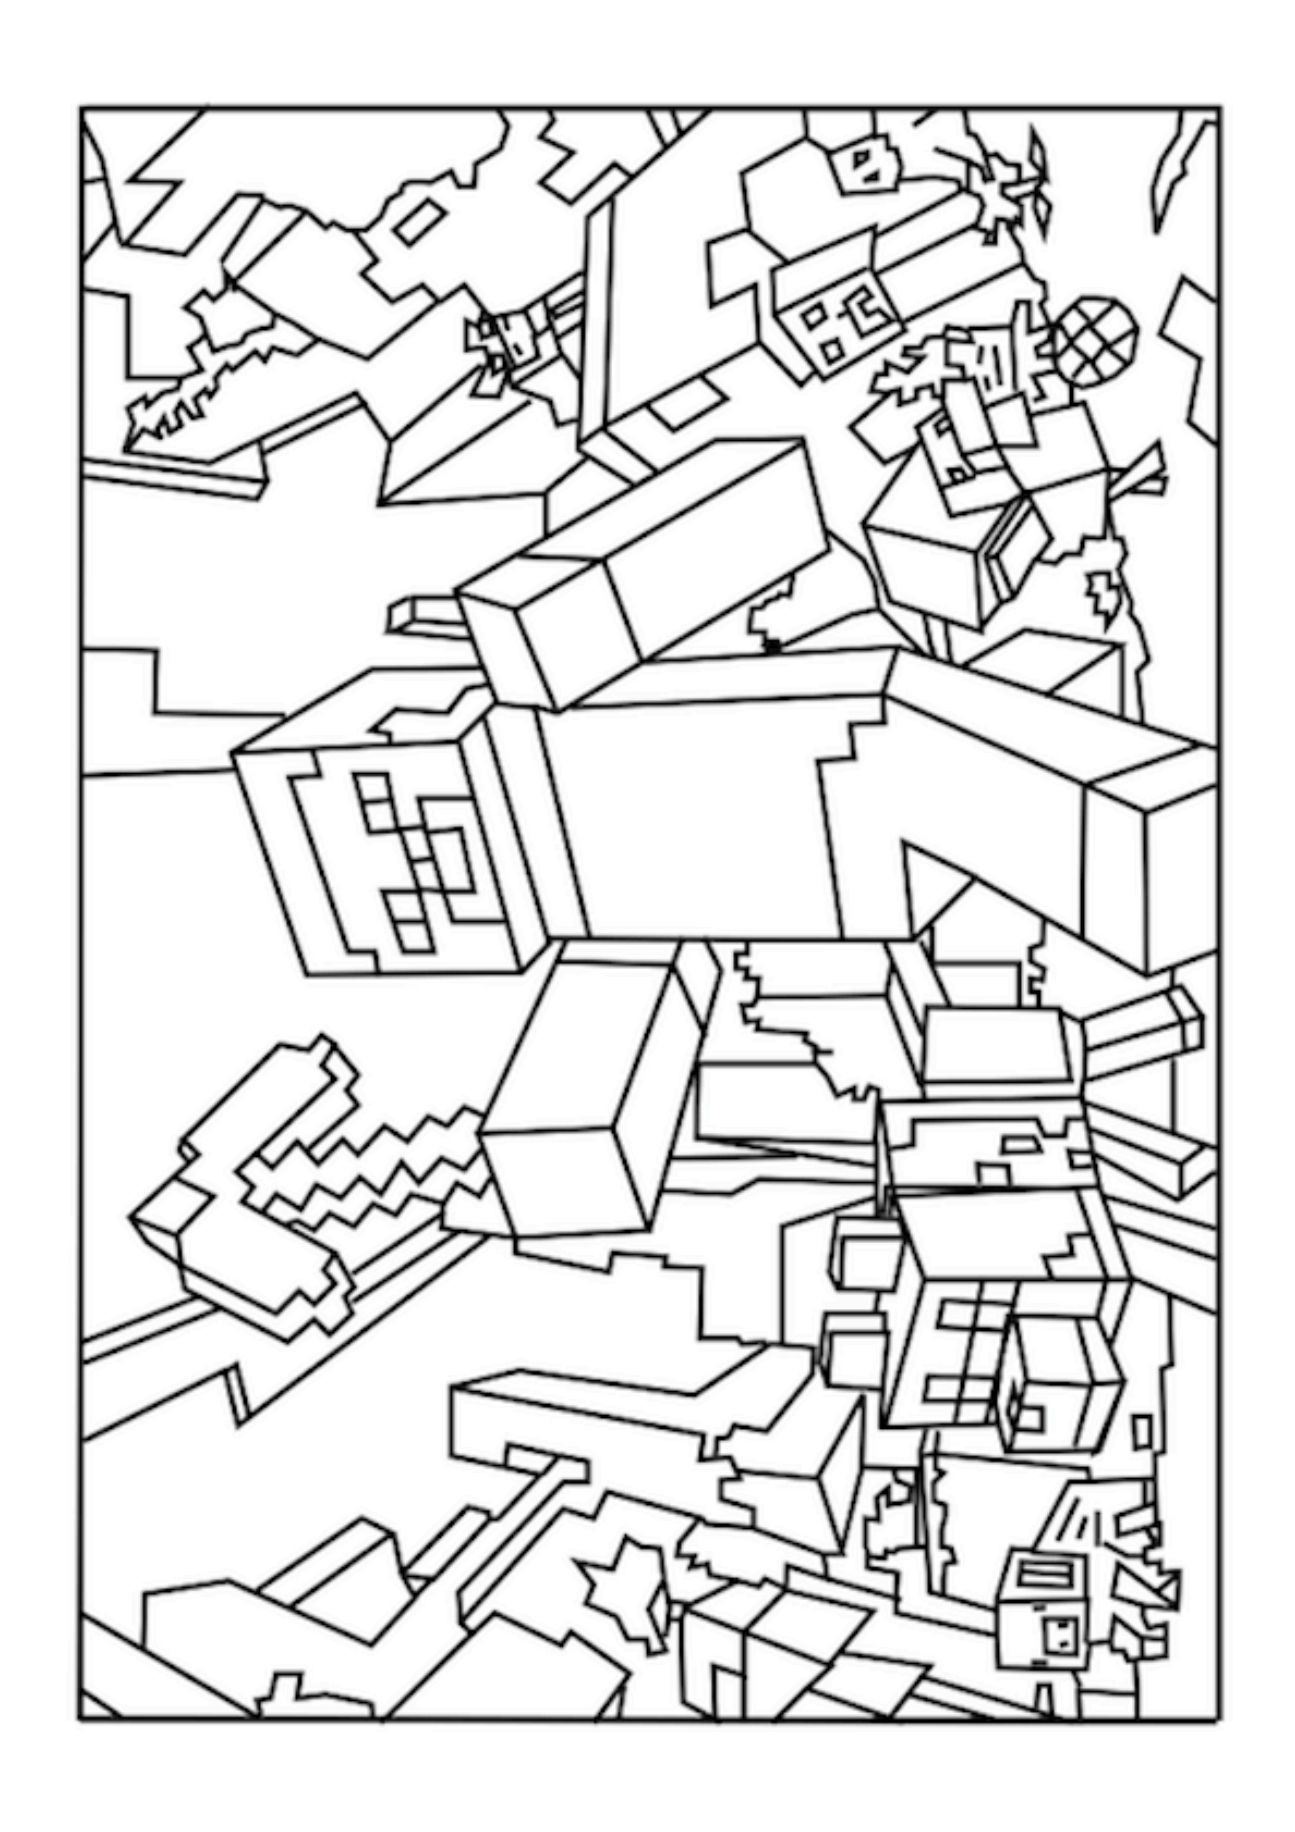 Minecraft Boys Coloring Pages
 A Minecraft World coloring page Kenny Stuff